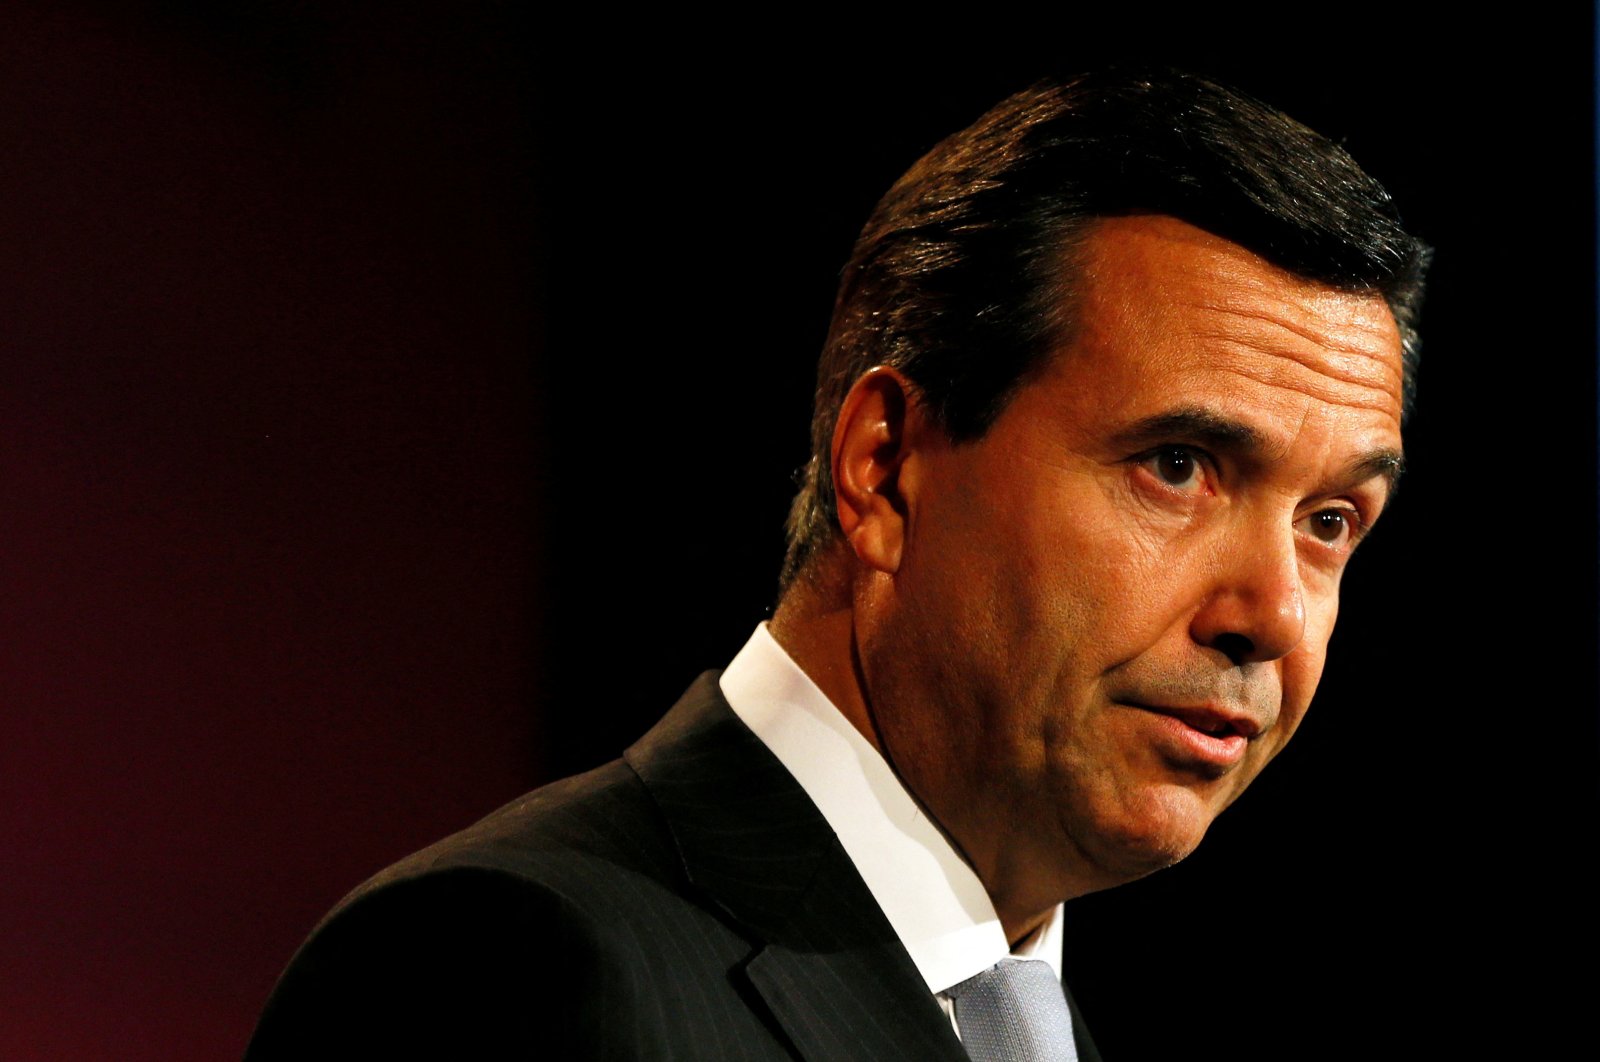 Antonio Horta-Osorio speaks at the British Chambers of Commerce annual meeting in central London, U.K, Feb. 10, 2015. (Reuters Photo)